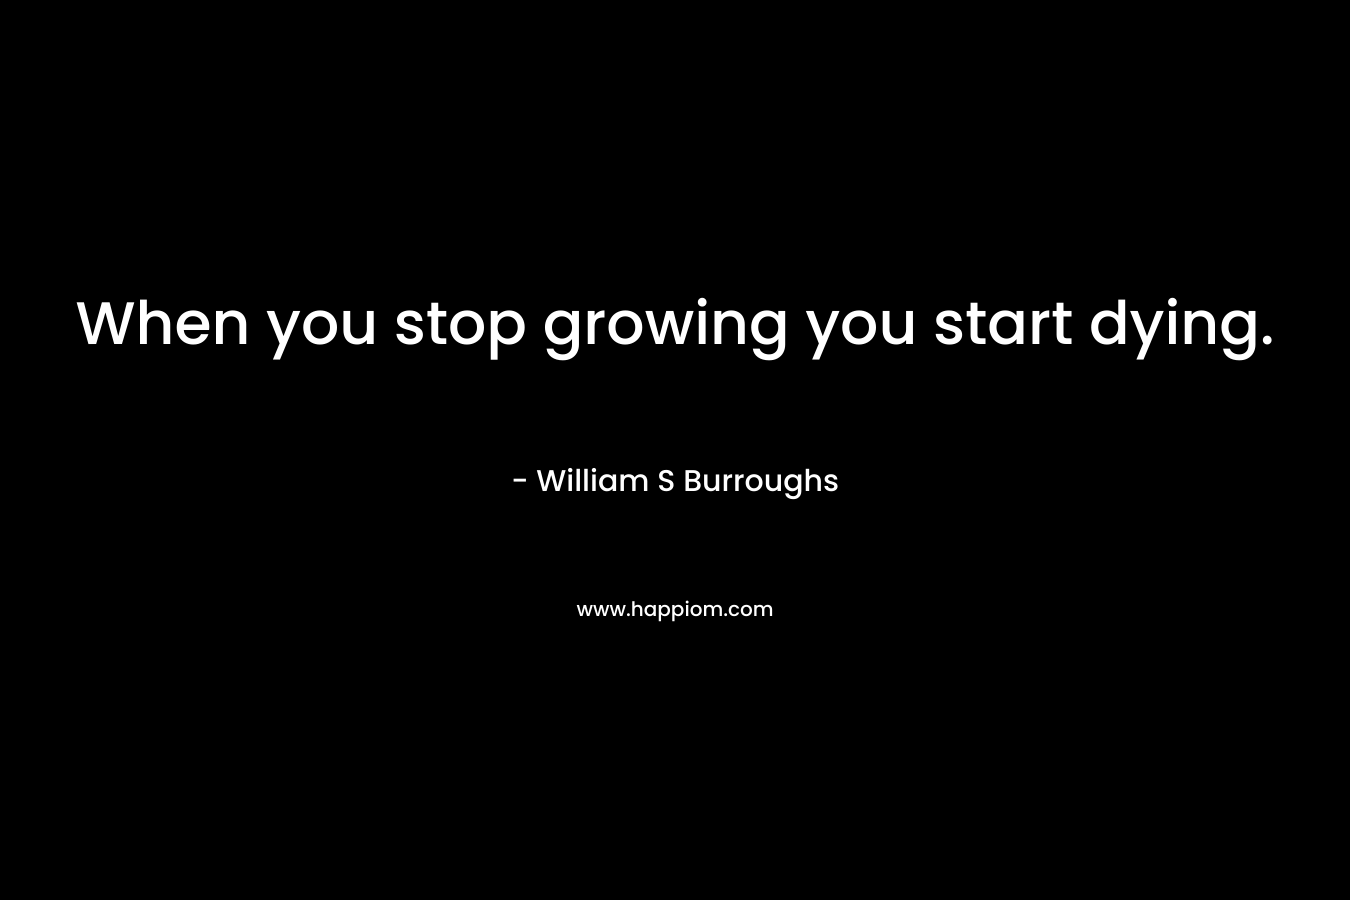 When you stop growing you start dying. – William S Burroughs